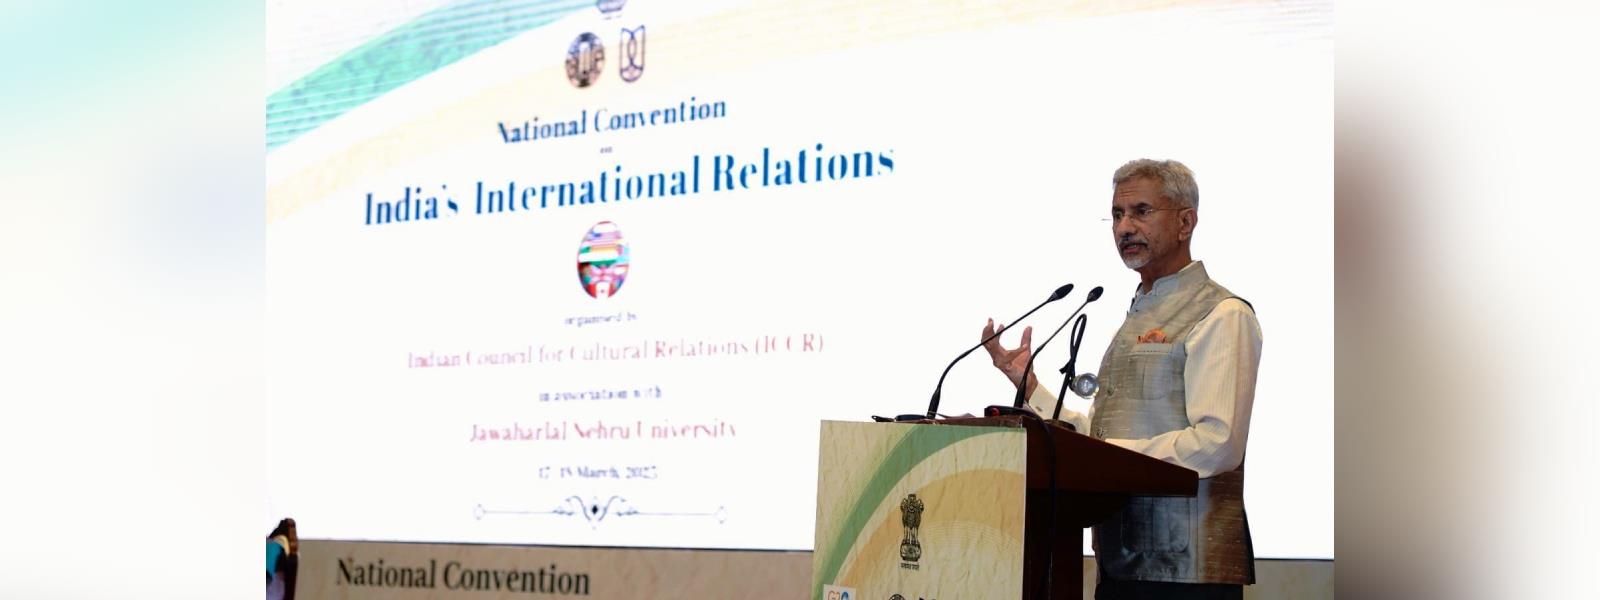 External Affairs Minister Dr. S. Jaishankar addressed the inaugural session of the National Convention on India’s International Relations in New Delhi